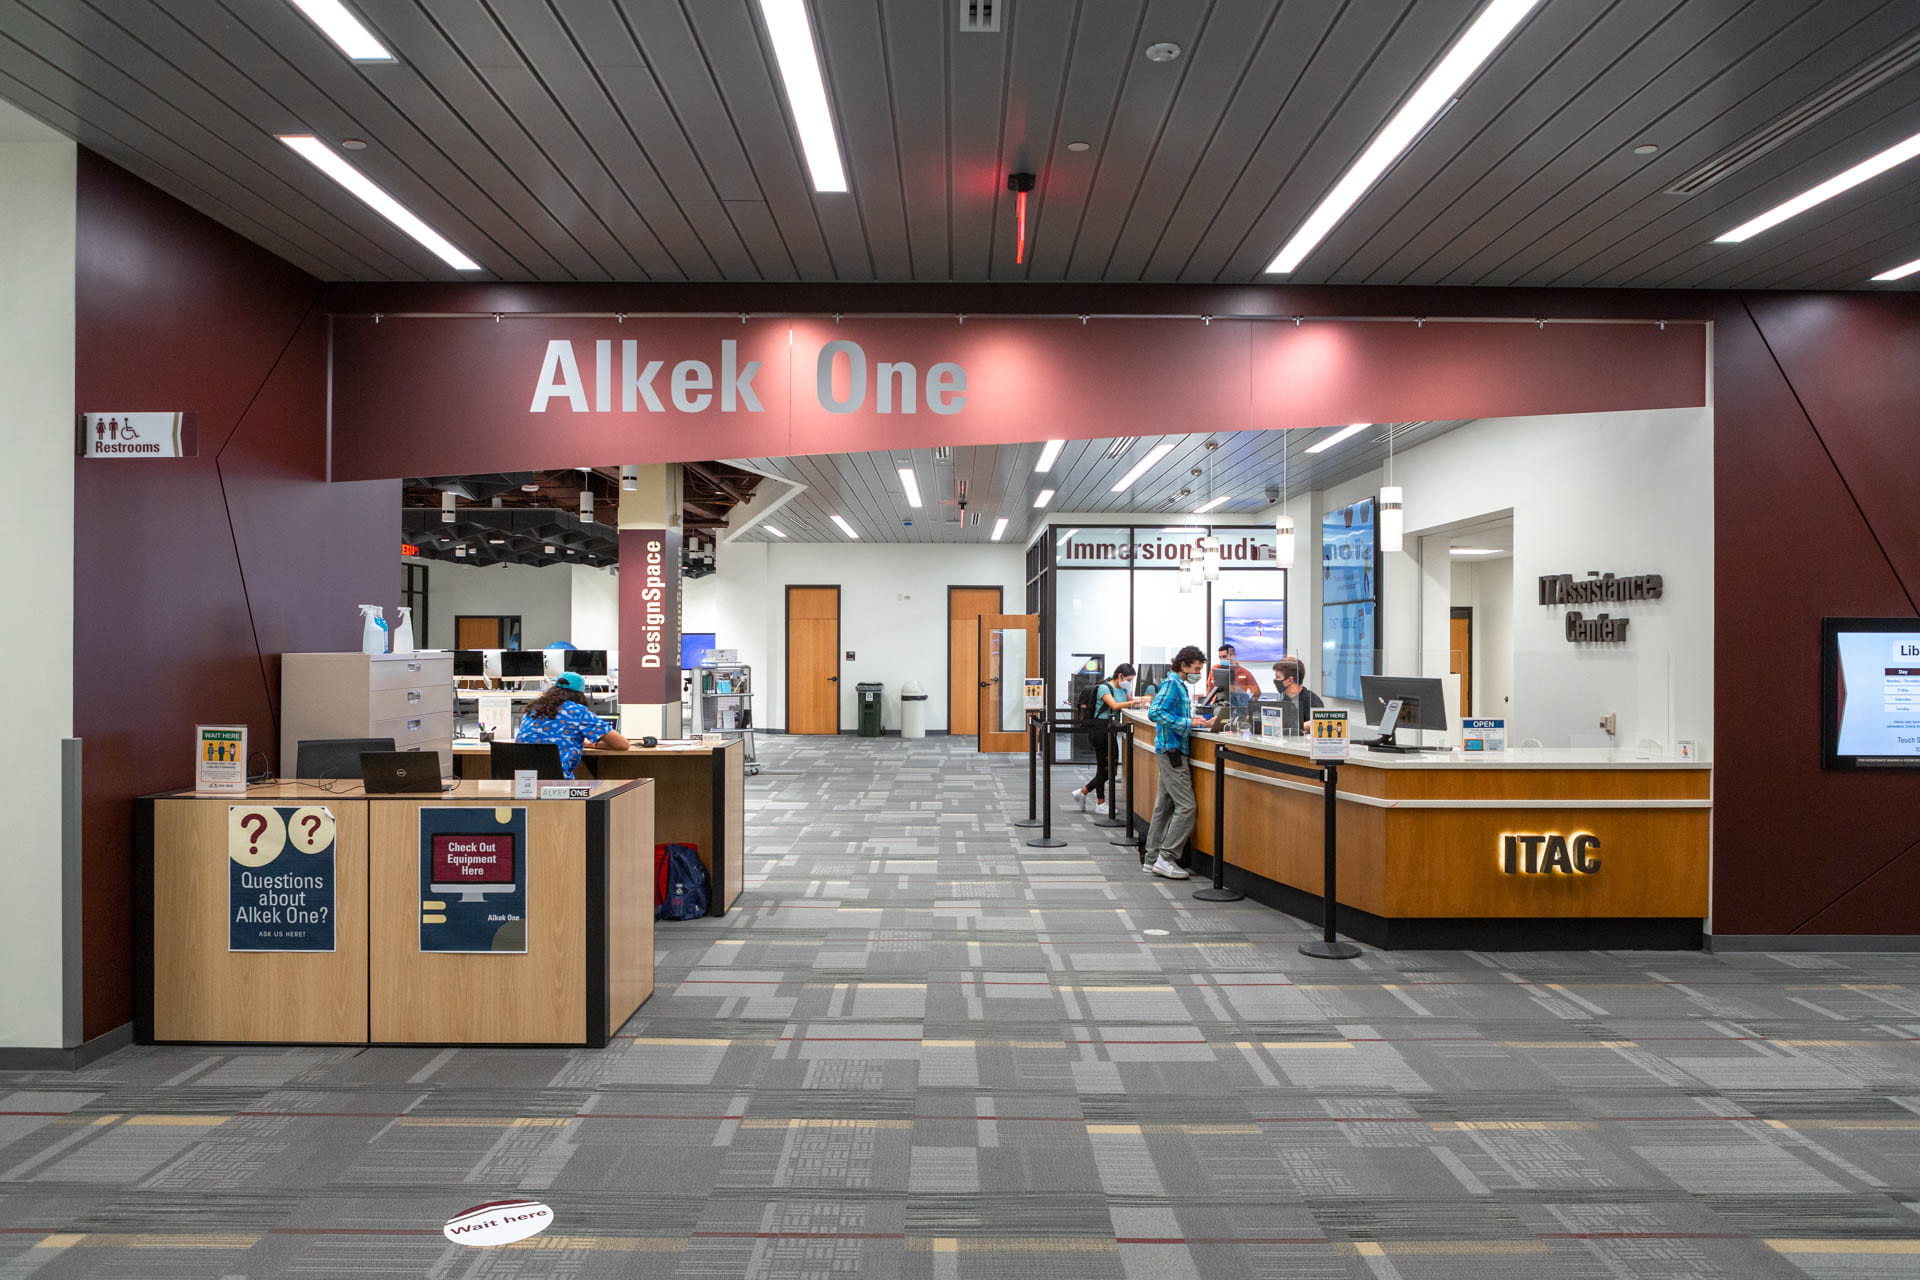 The lobby of Alkek One at Texas State University Libraries featuring some people at a help desk